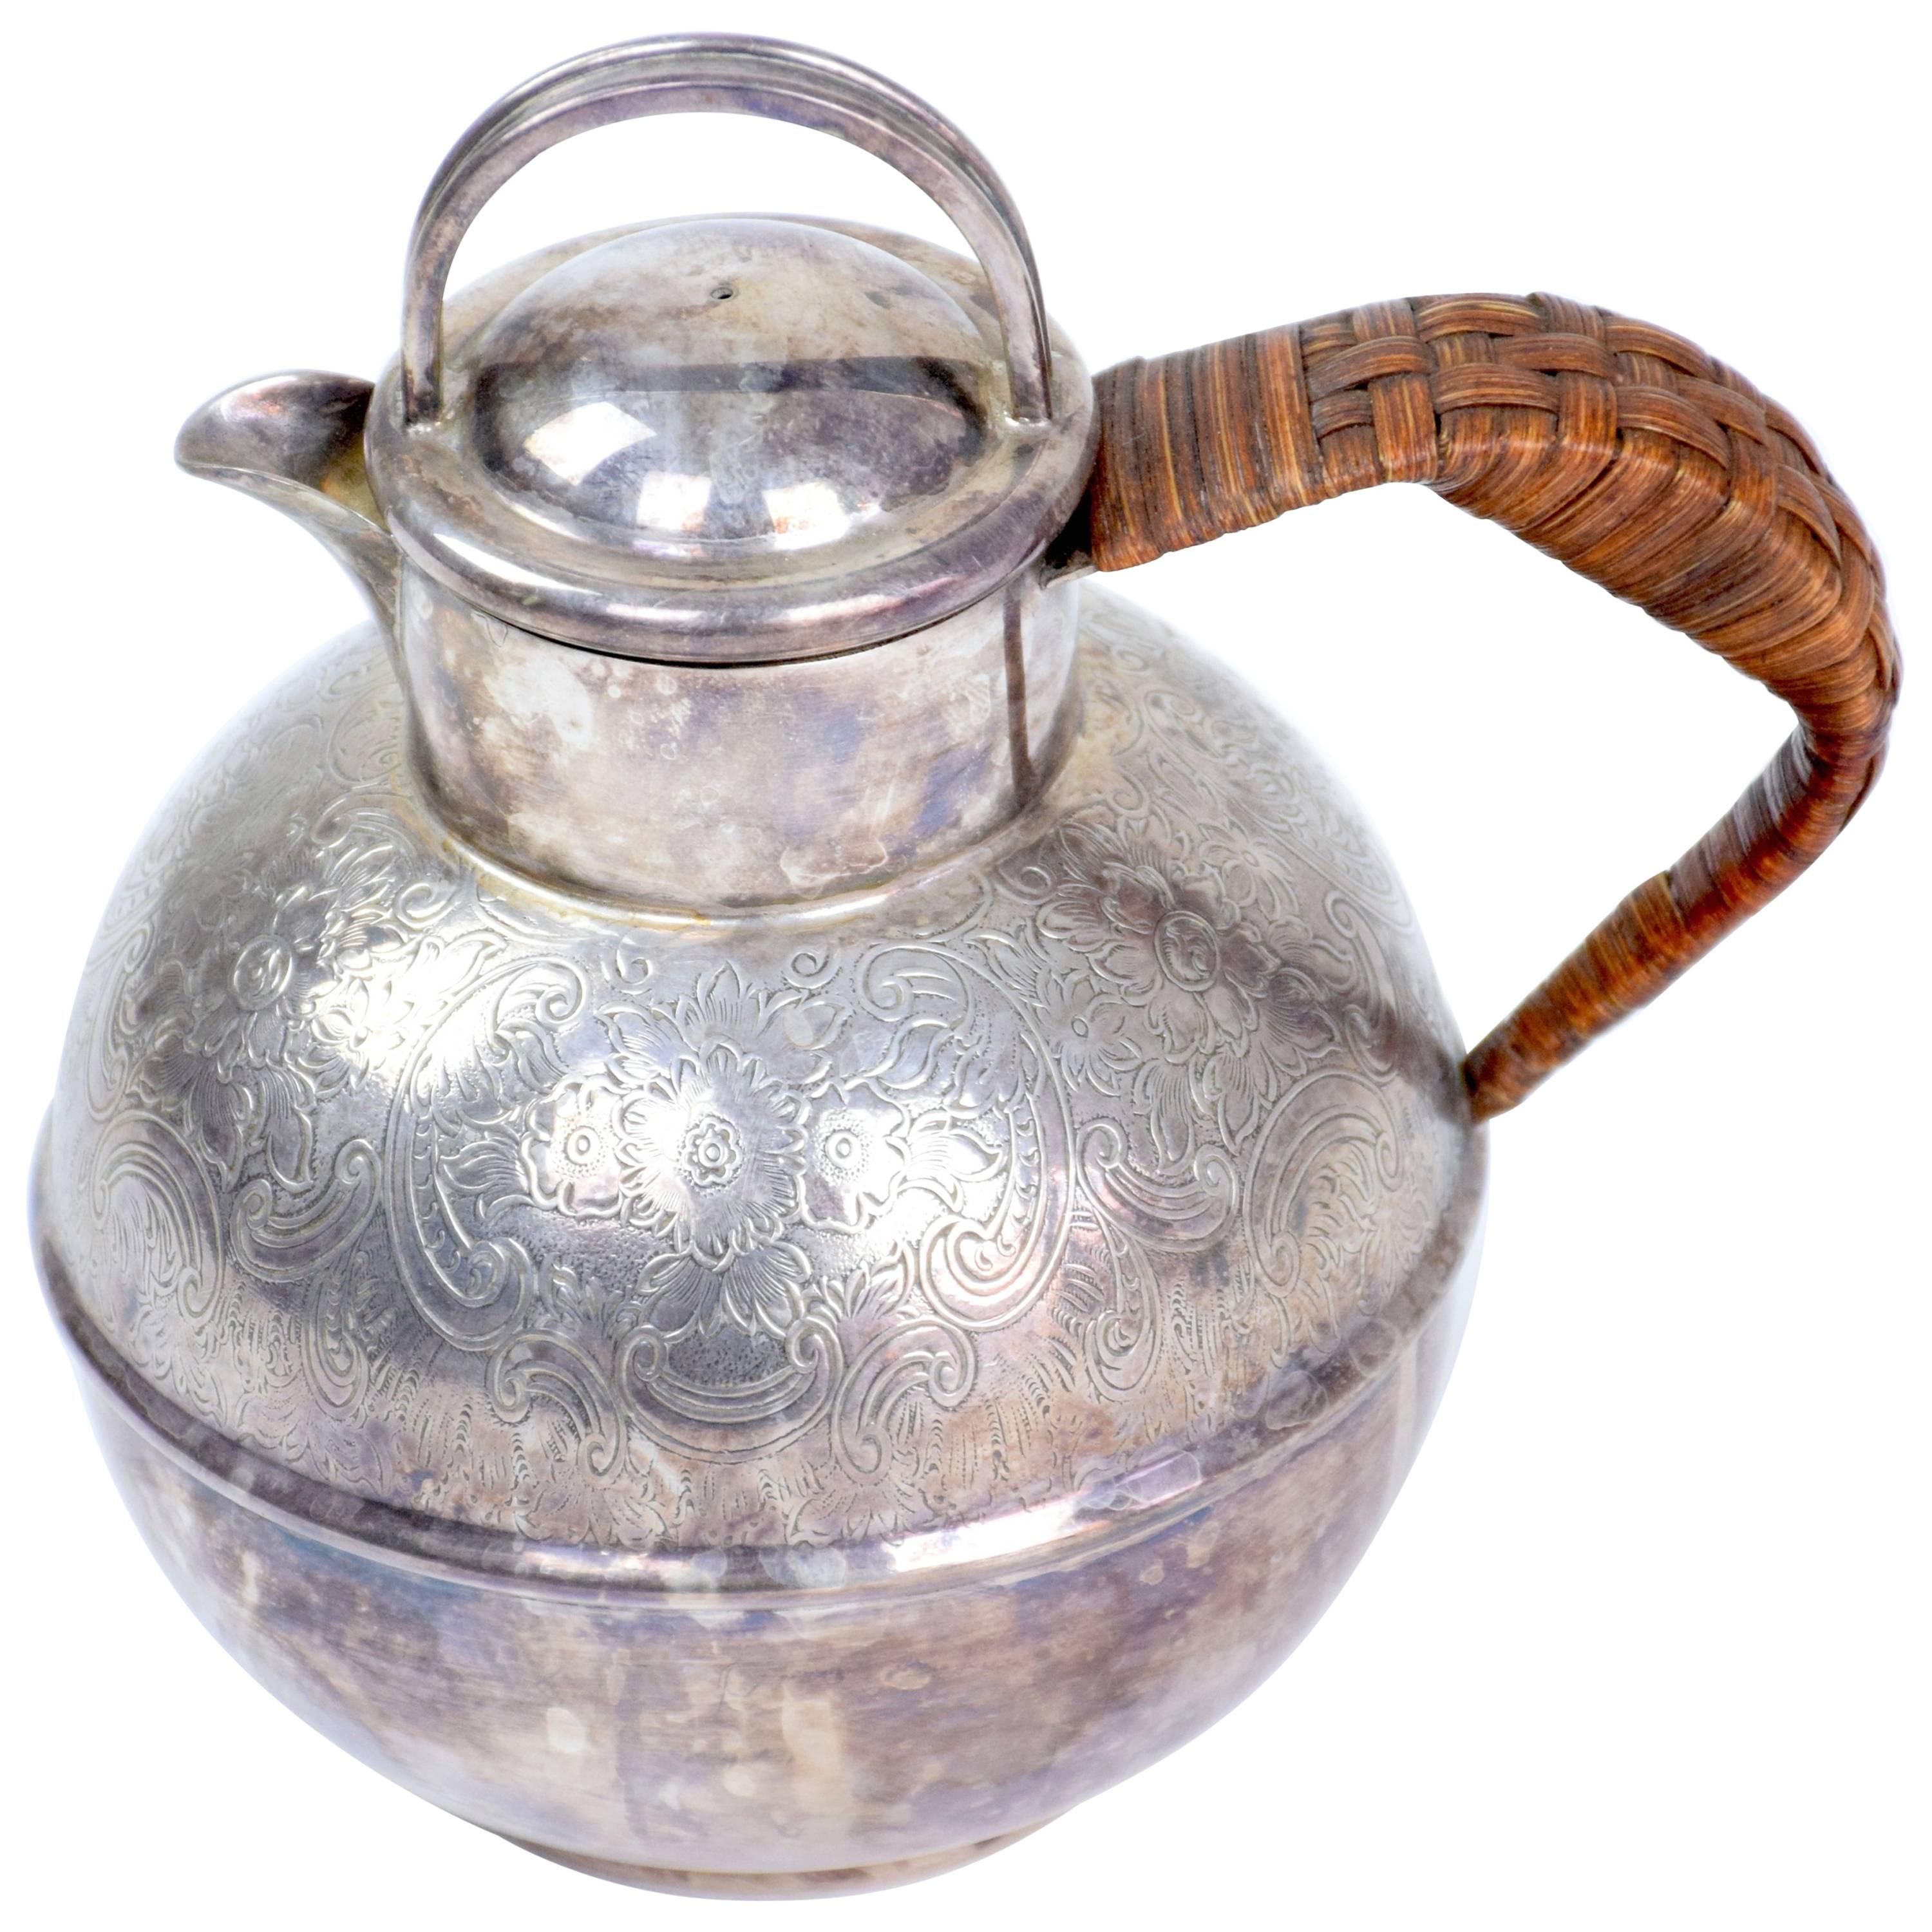 Silver Plate English Antique Small Silver Pitcher or Teapot by Bailey Banks & Biddle